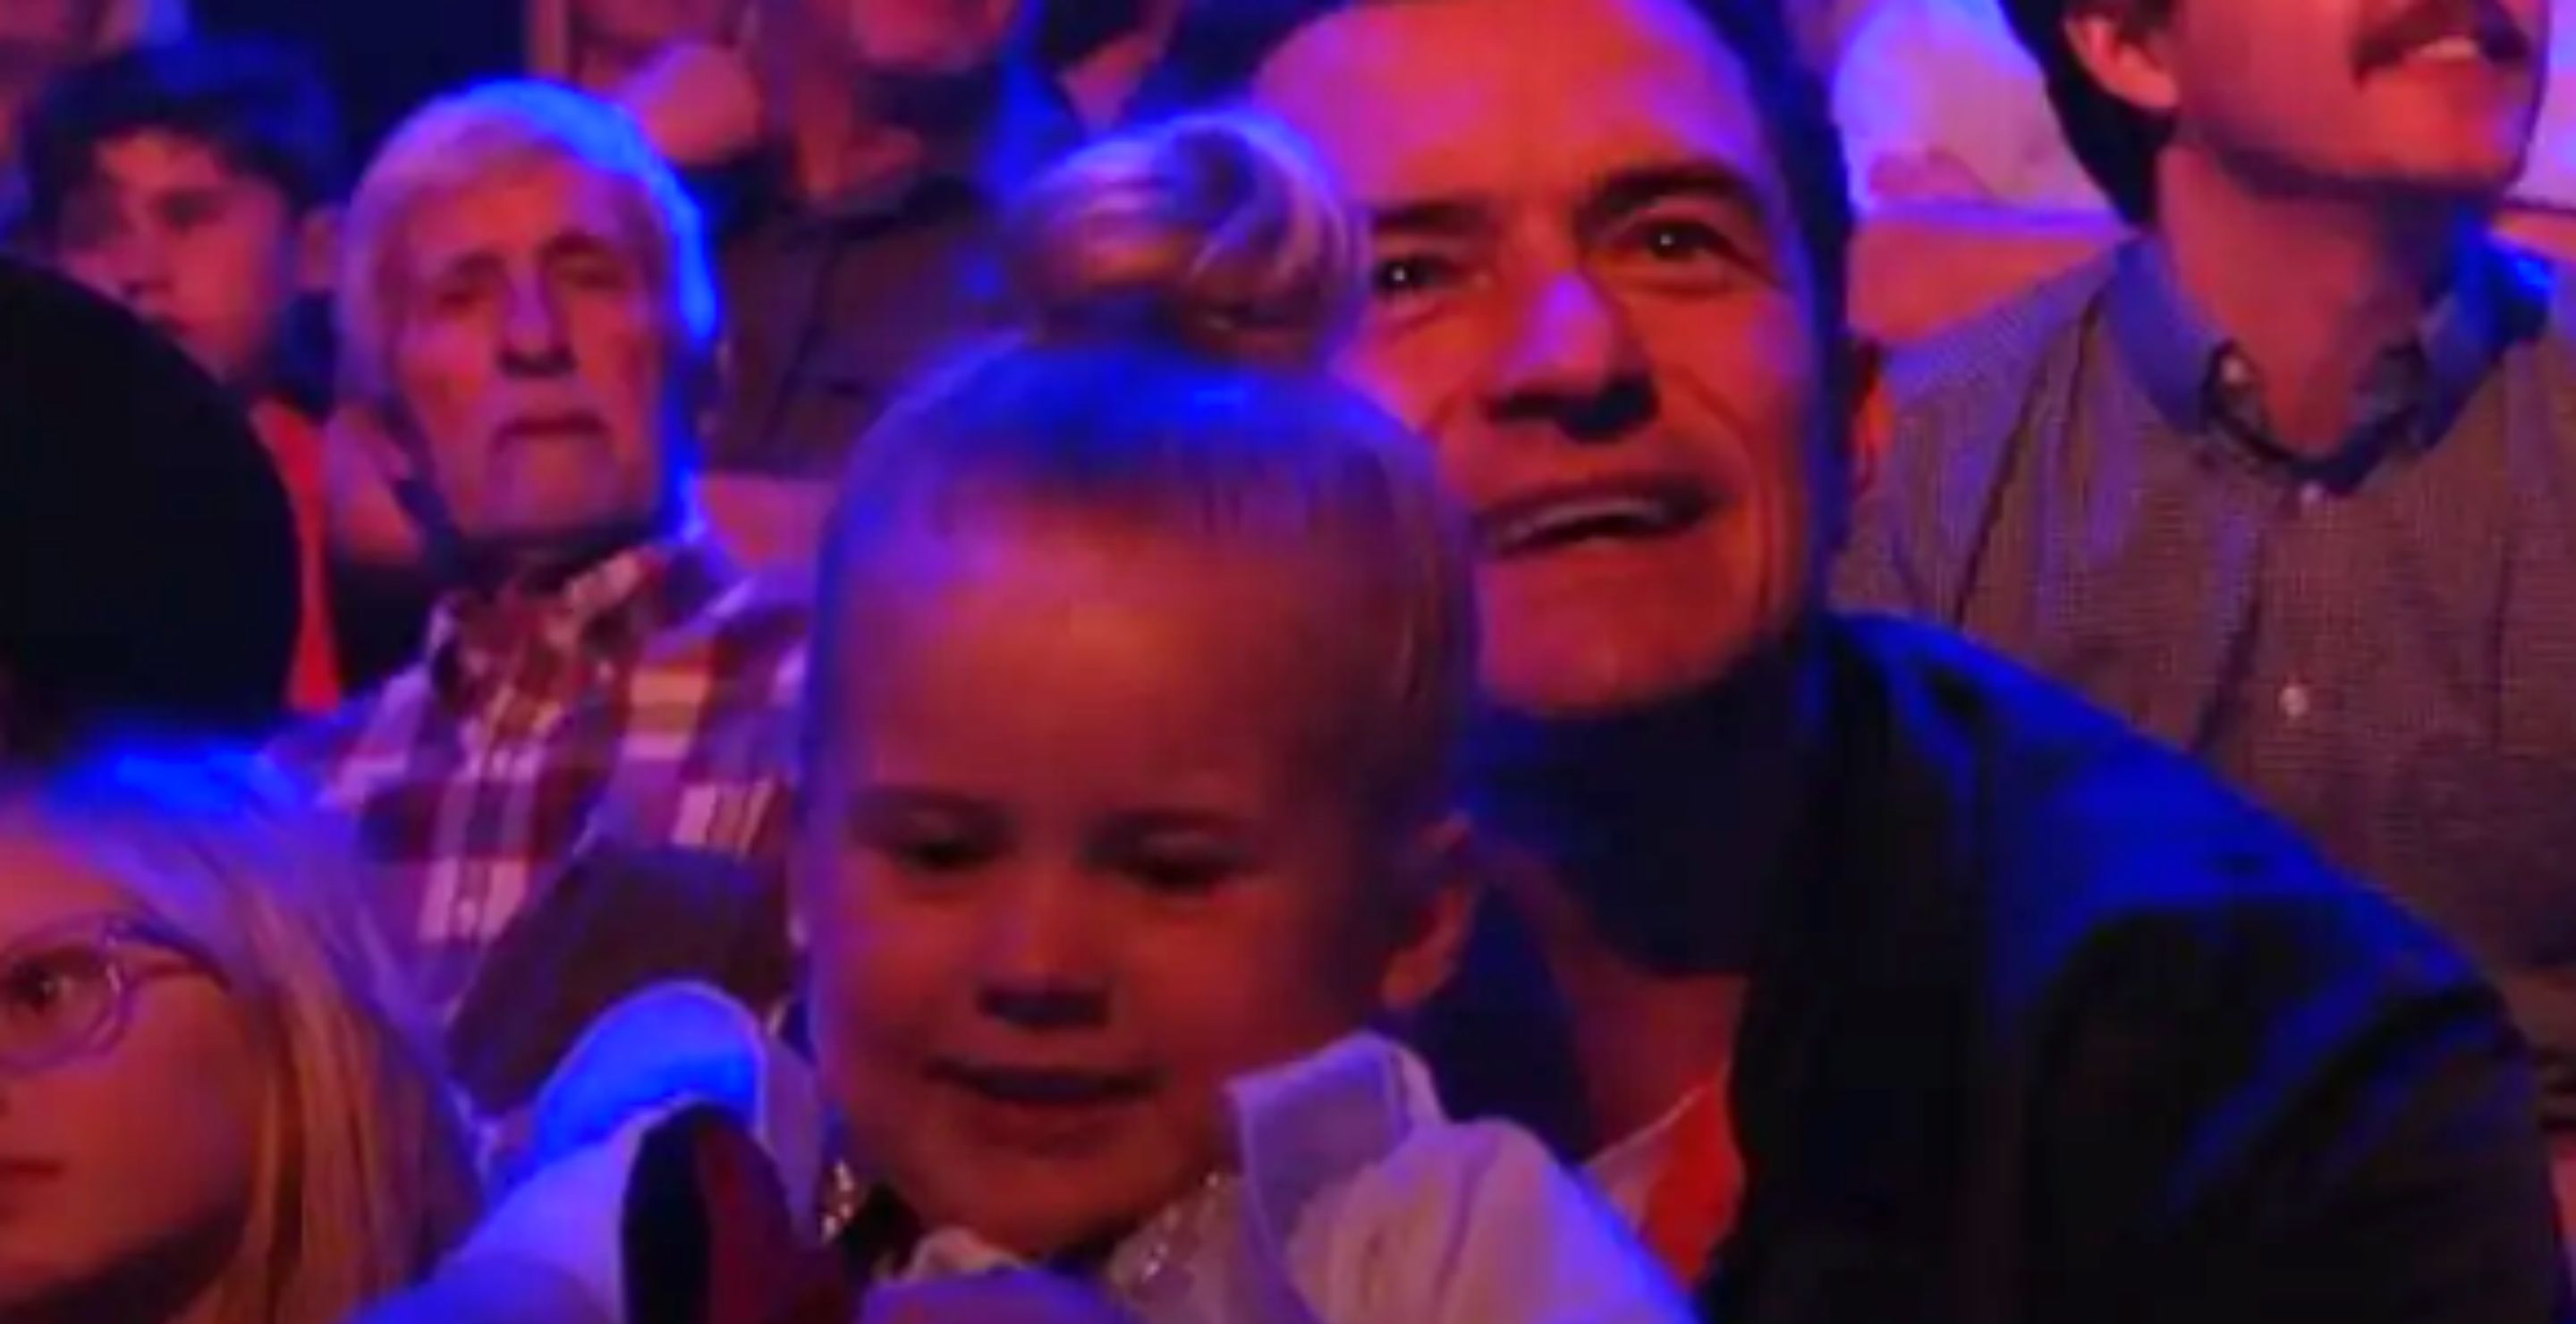 Katy Perry's Daughter, Daisy, Made An Adorable Cameo Appearance During 'American Idol'